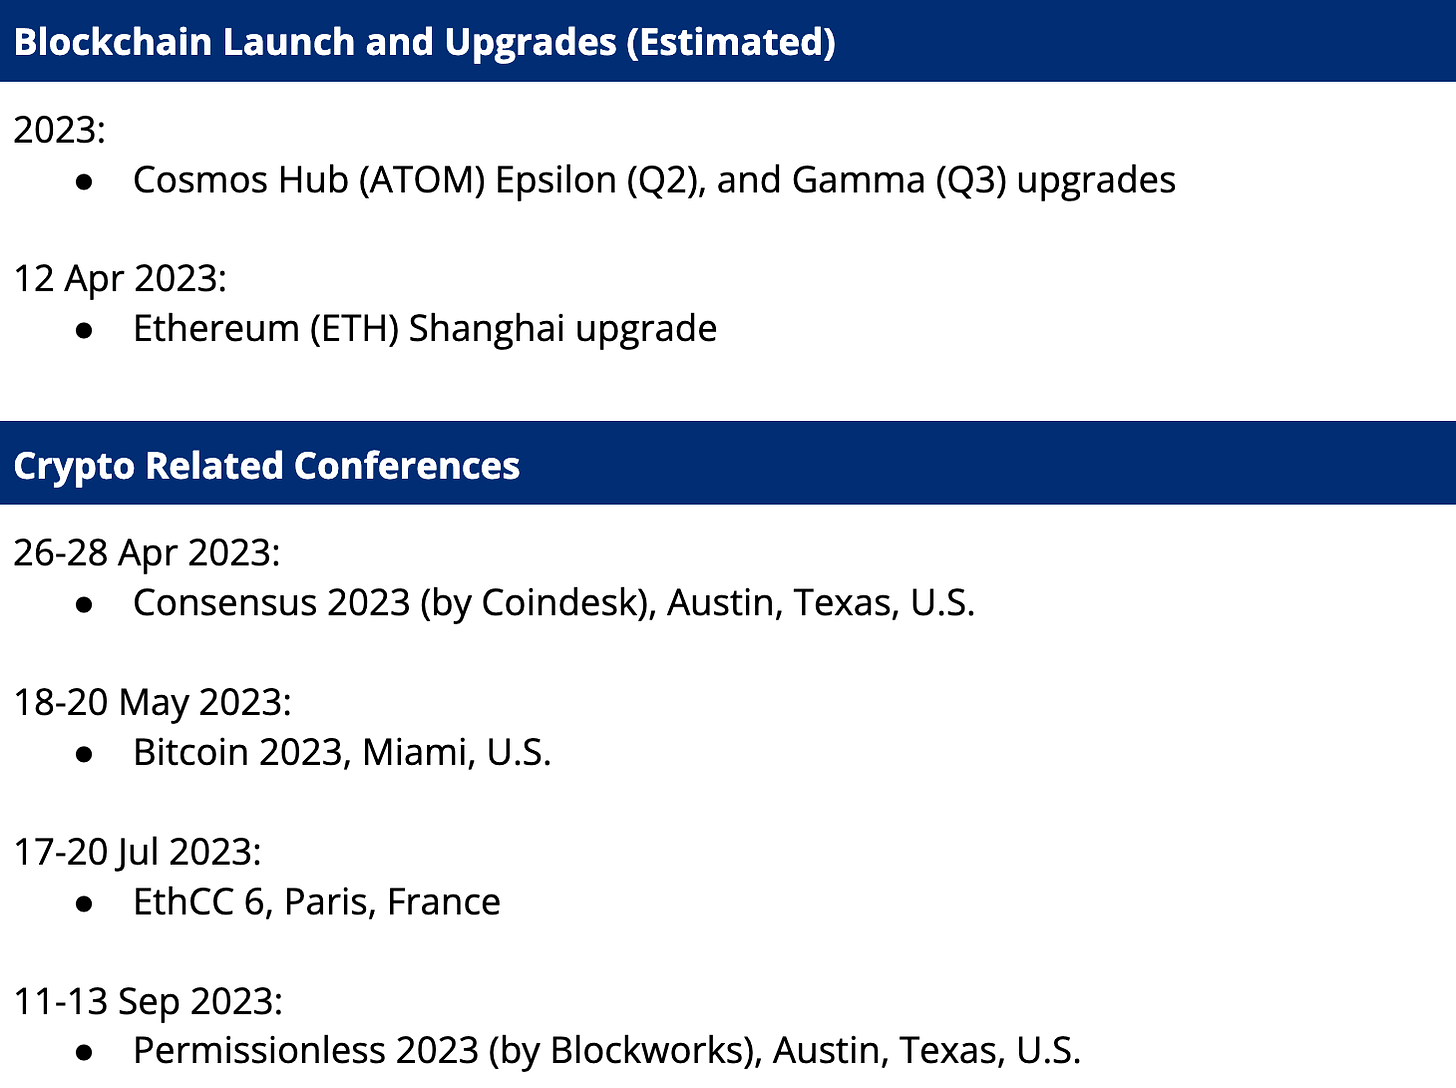 Blockchain Launch And Upgrades 3 Apr